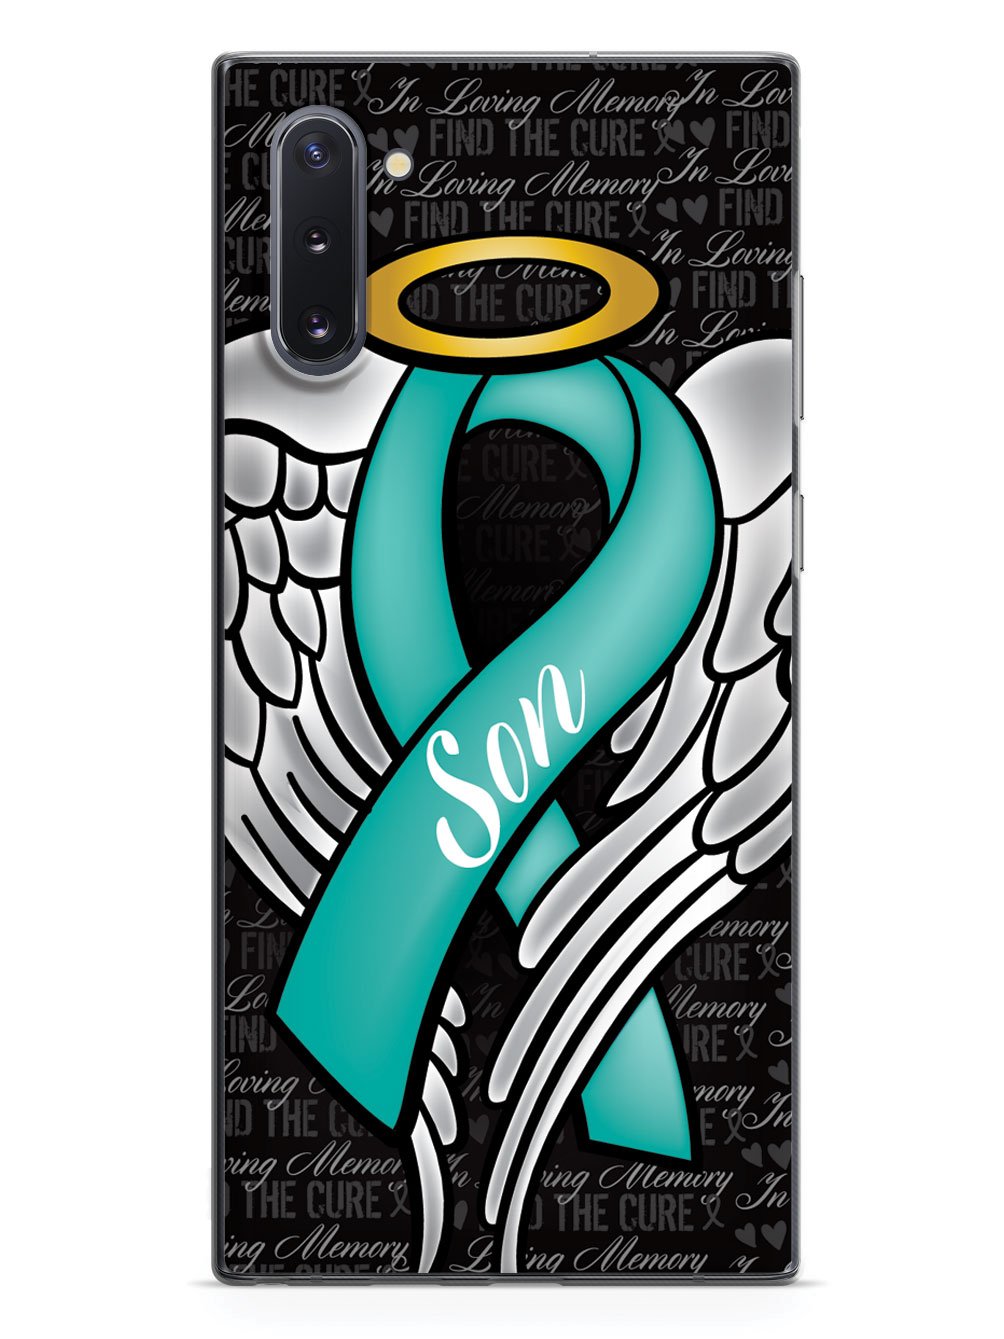 In Loving Memory of My Son - Teal Ribbon Case